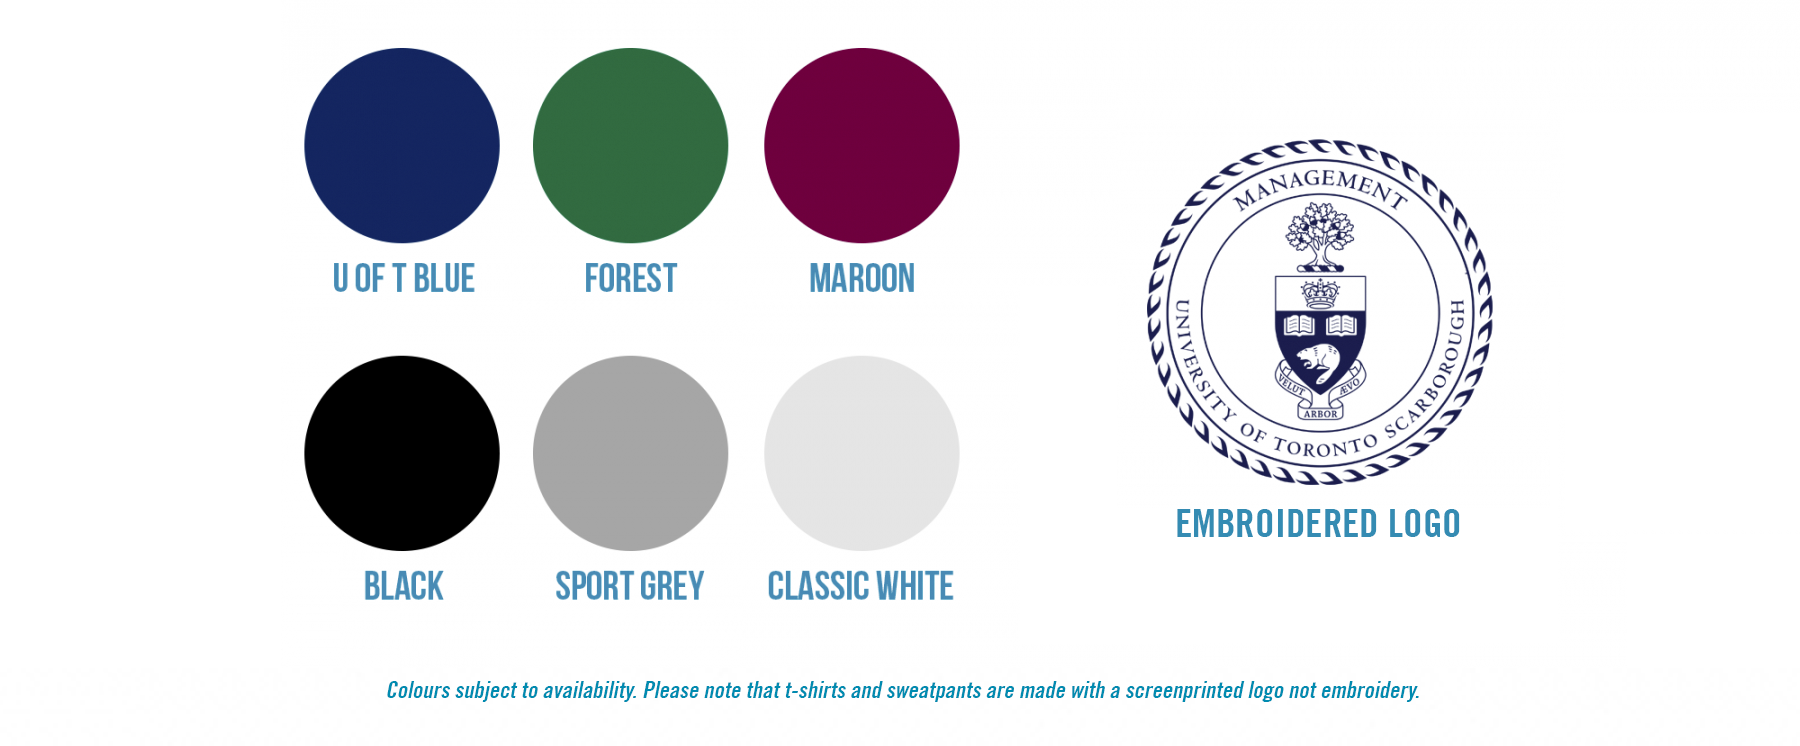 Blue, Forest, Maroon, Black, Sport Grey, Classic White colour swatches. Embroidered logo (except t-shirt).